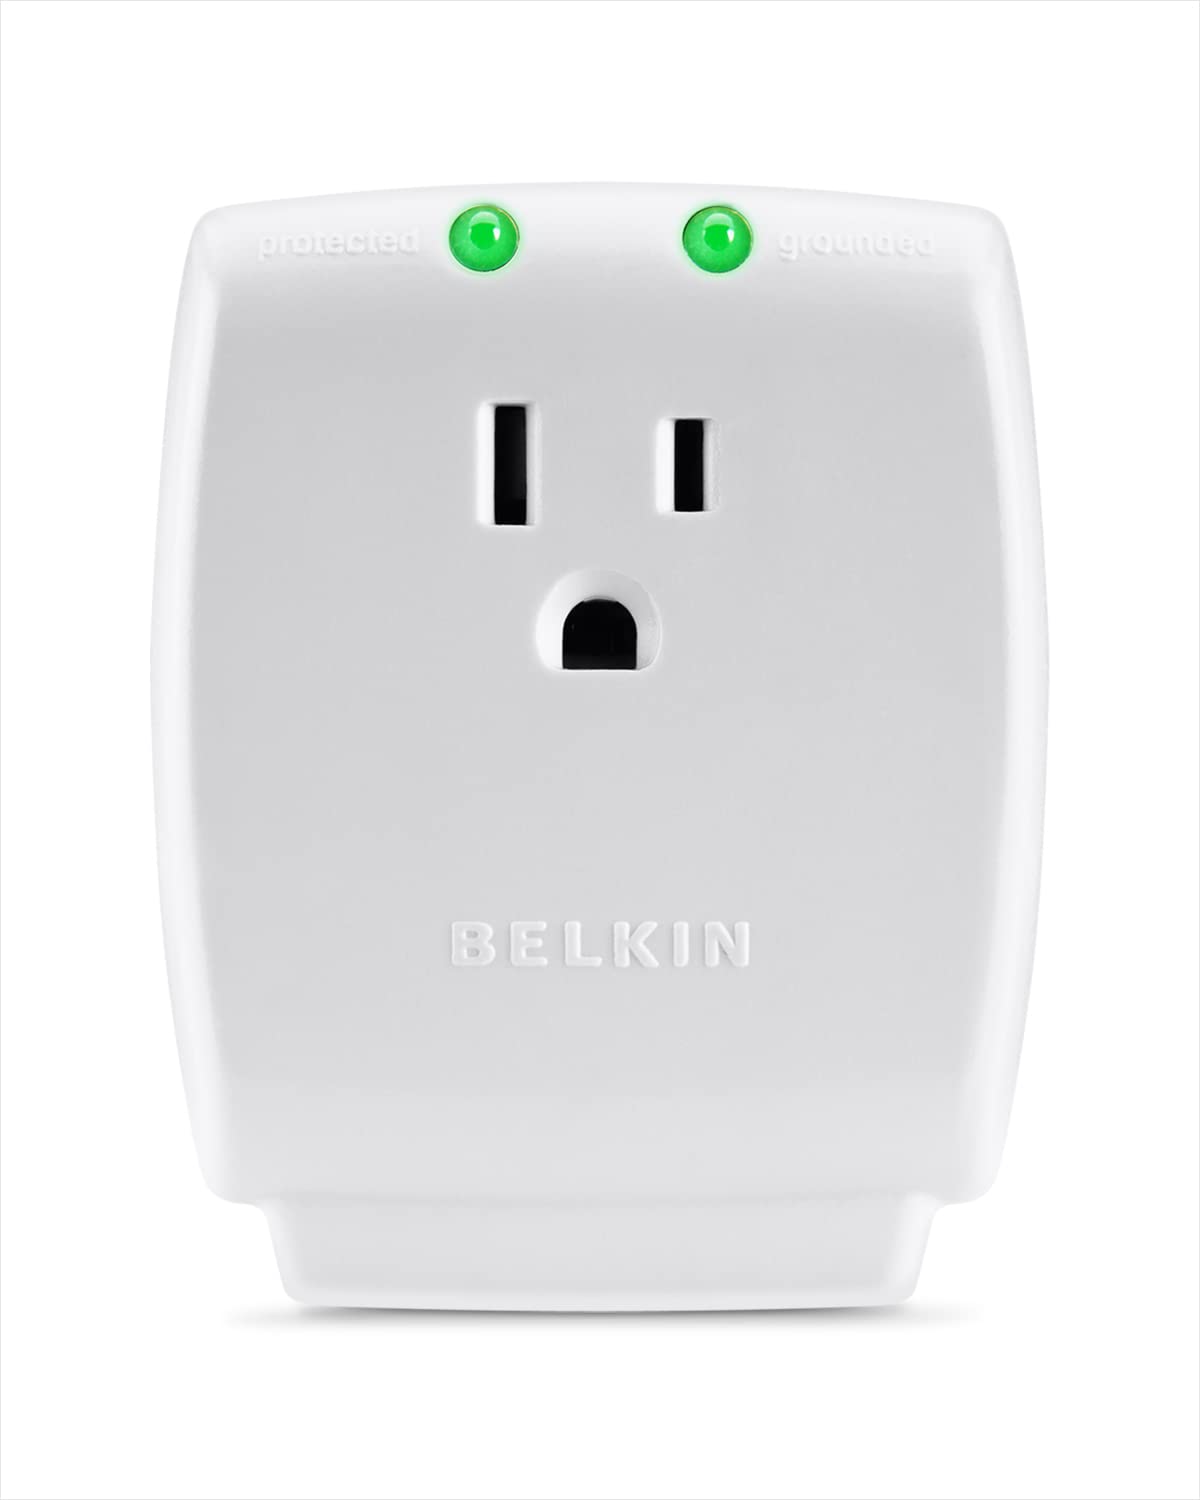 Belkin 6-Outlet Power Strip Surge Protector with 3-Foot Power Cord, 300 Joules (F5C047),White & 1-Outlet Home Series SurgeCube - & Protected Light Indicators for Home White, 1080 Joules